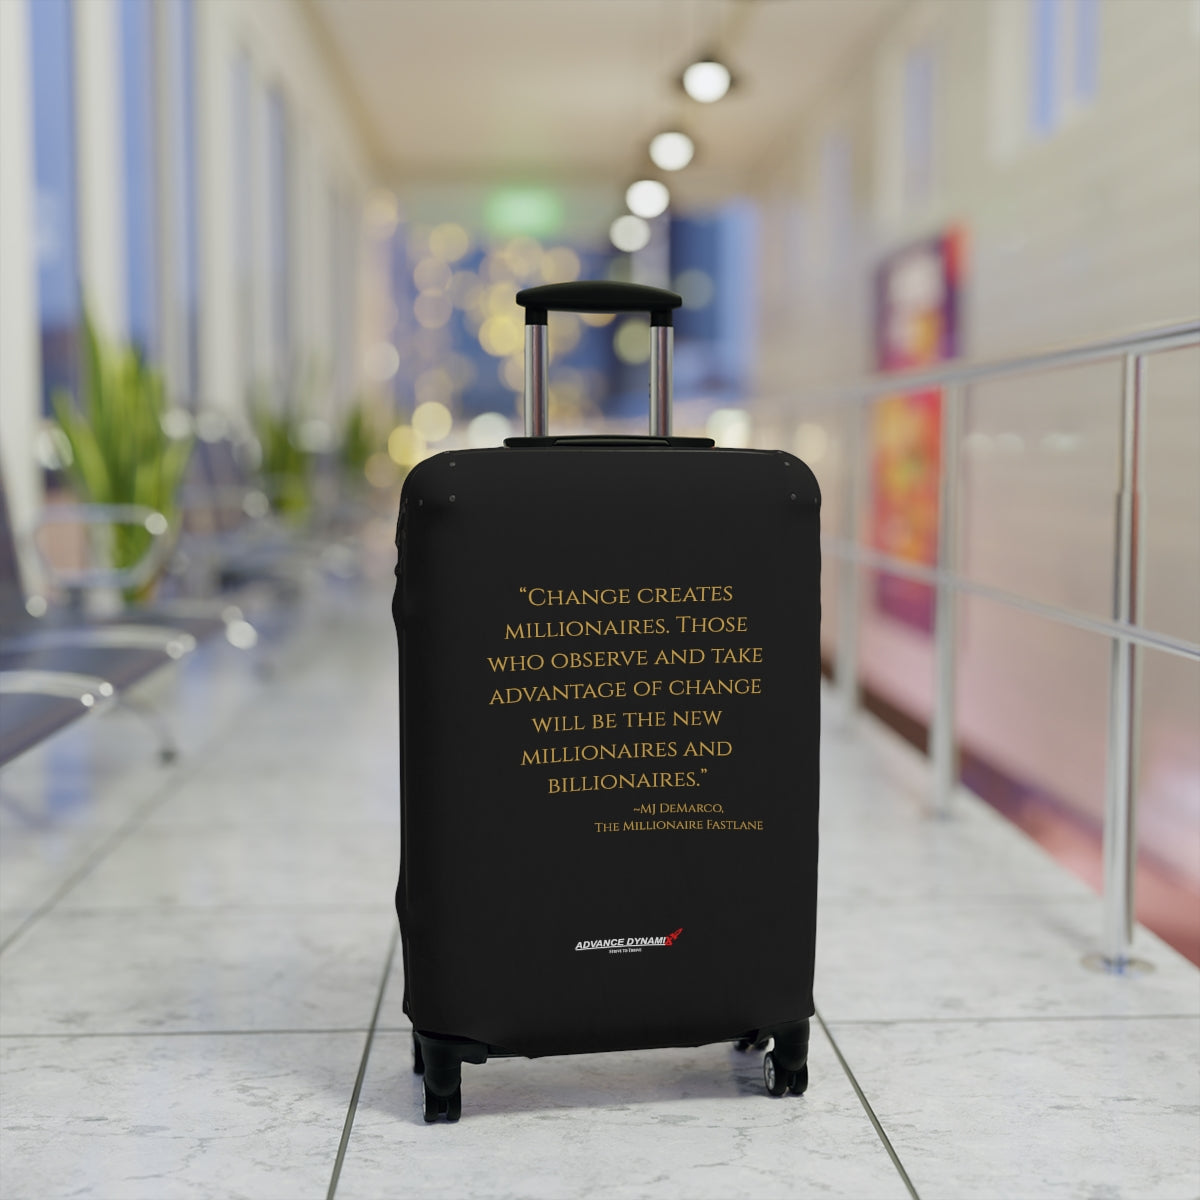 "Change creates millionaires. Those who..." ~MJ DeMarco, The Millionaire Fastlane - Luggage Covers Infused with Advance Dynamix Add-A-Tude - Tell the world!